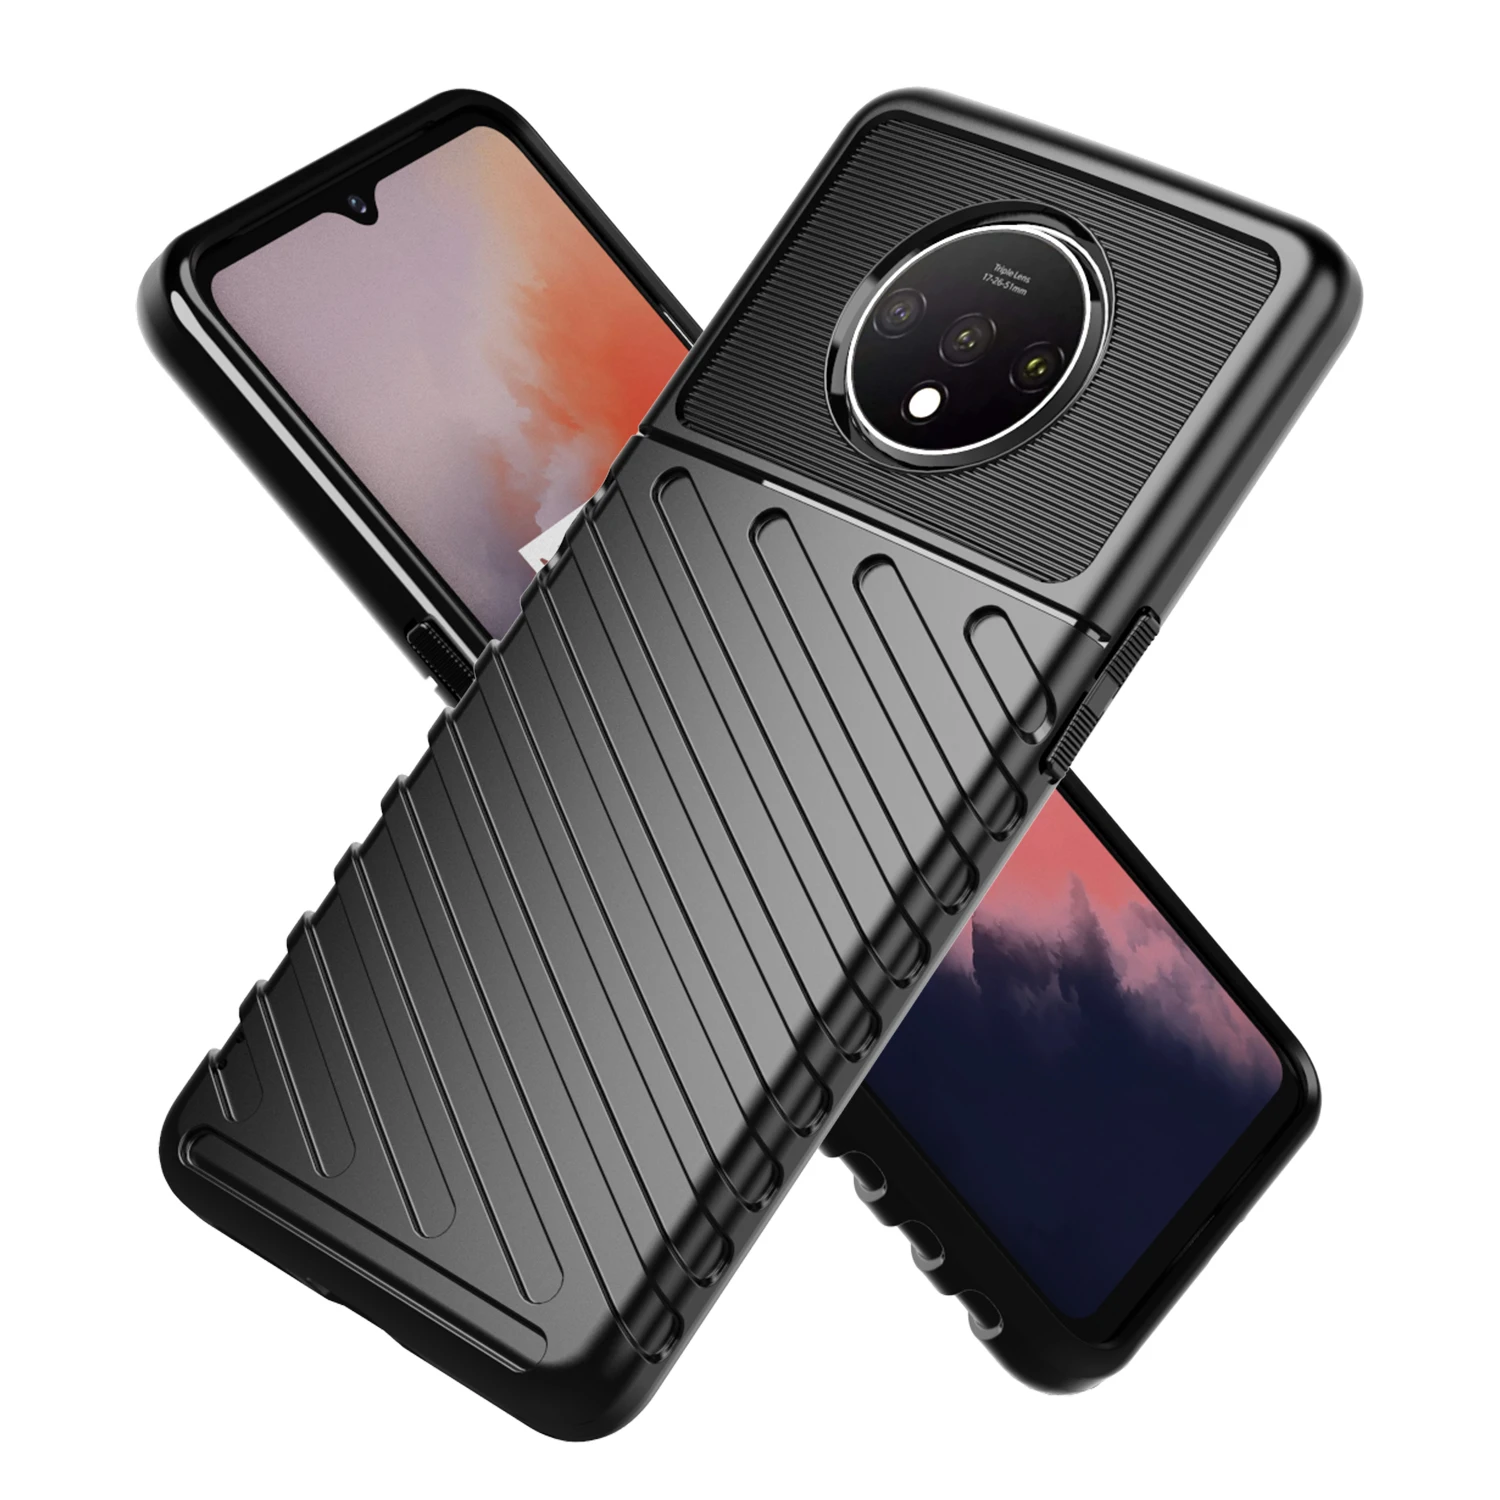 

Luxury TPU Shockproof Cell Phone Case For OnePlus 7T Factory wholesale Soft Silicone mobile Cover For OnePlus 7T Phone case, 3 colors